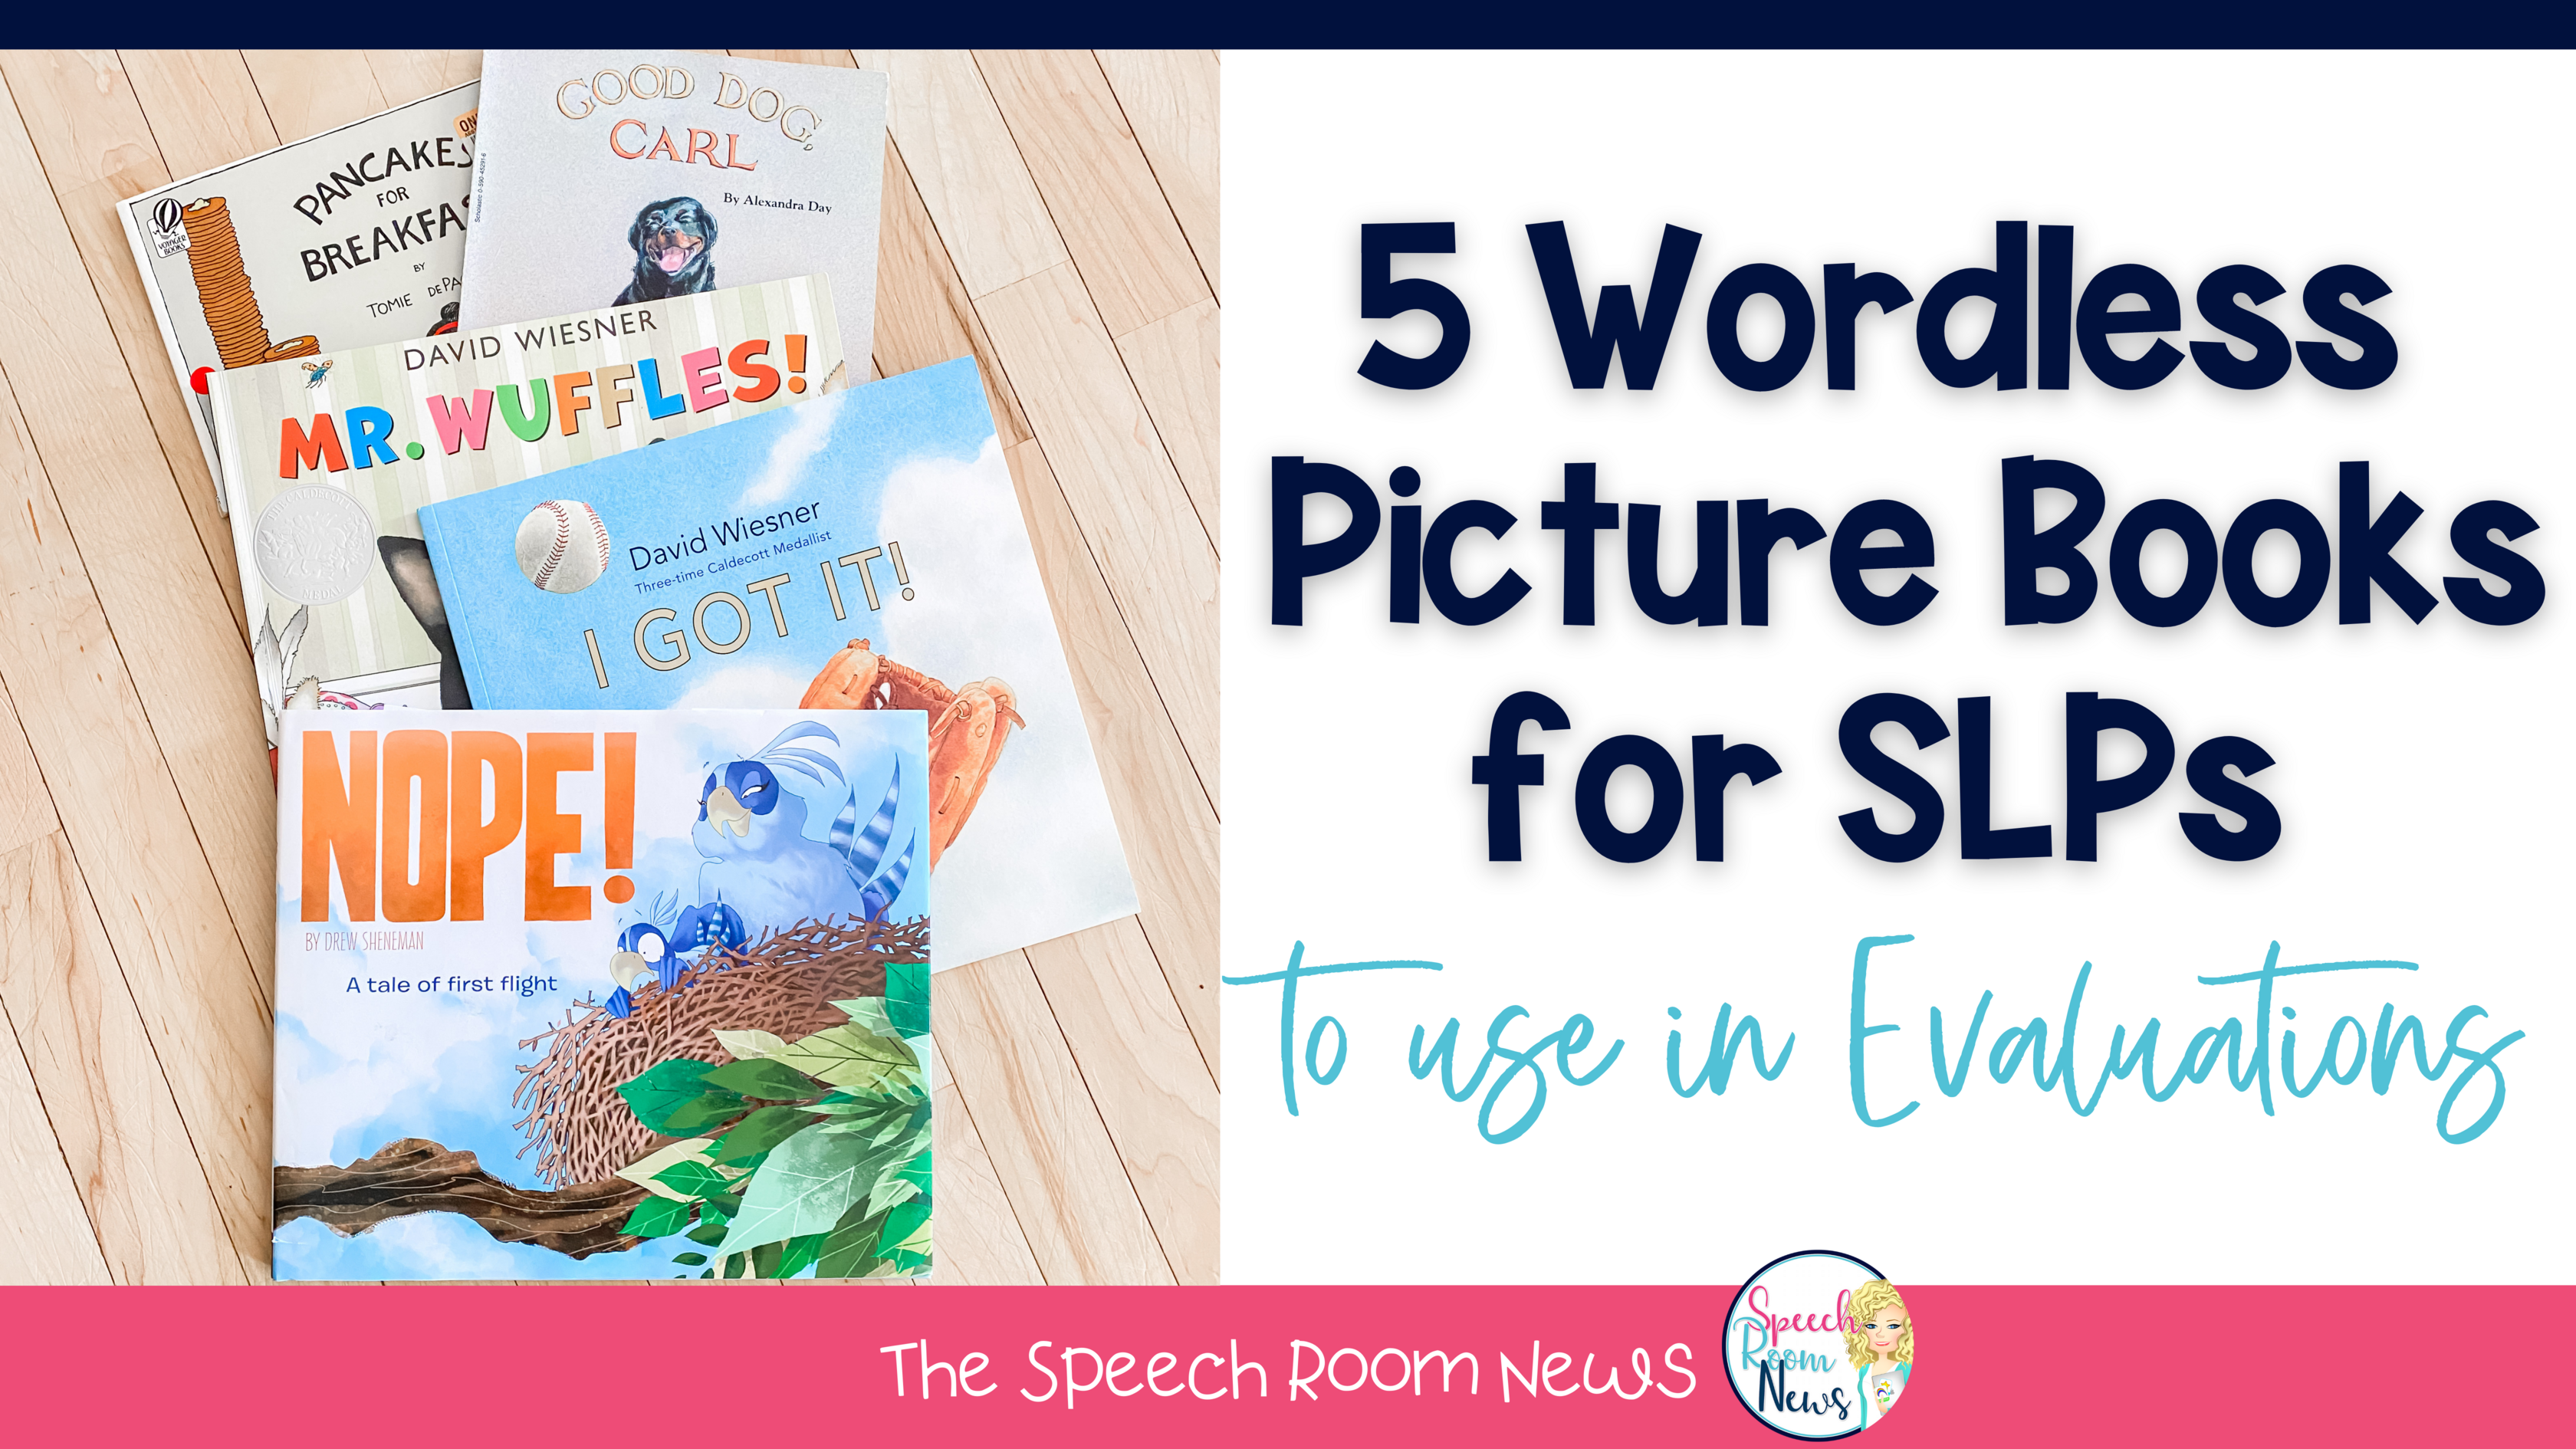 5 Wordless Picture Books for SLPs to Use in Evaluations